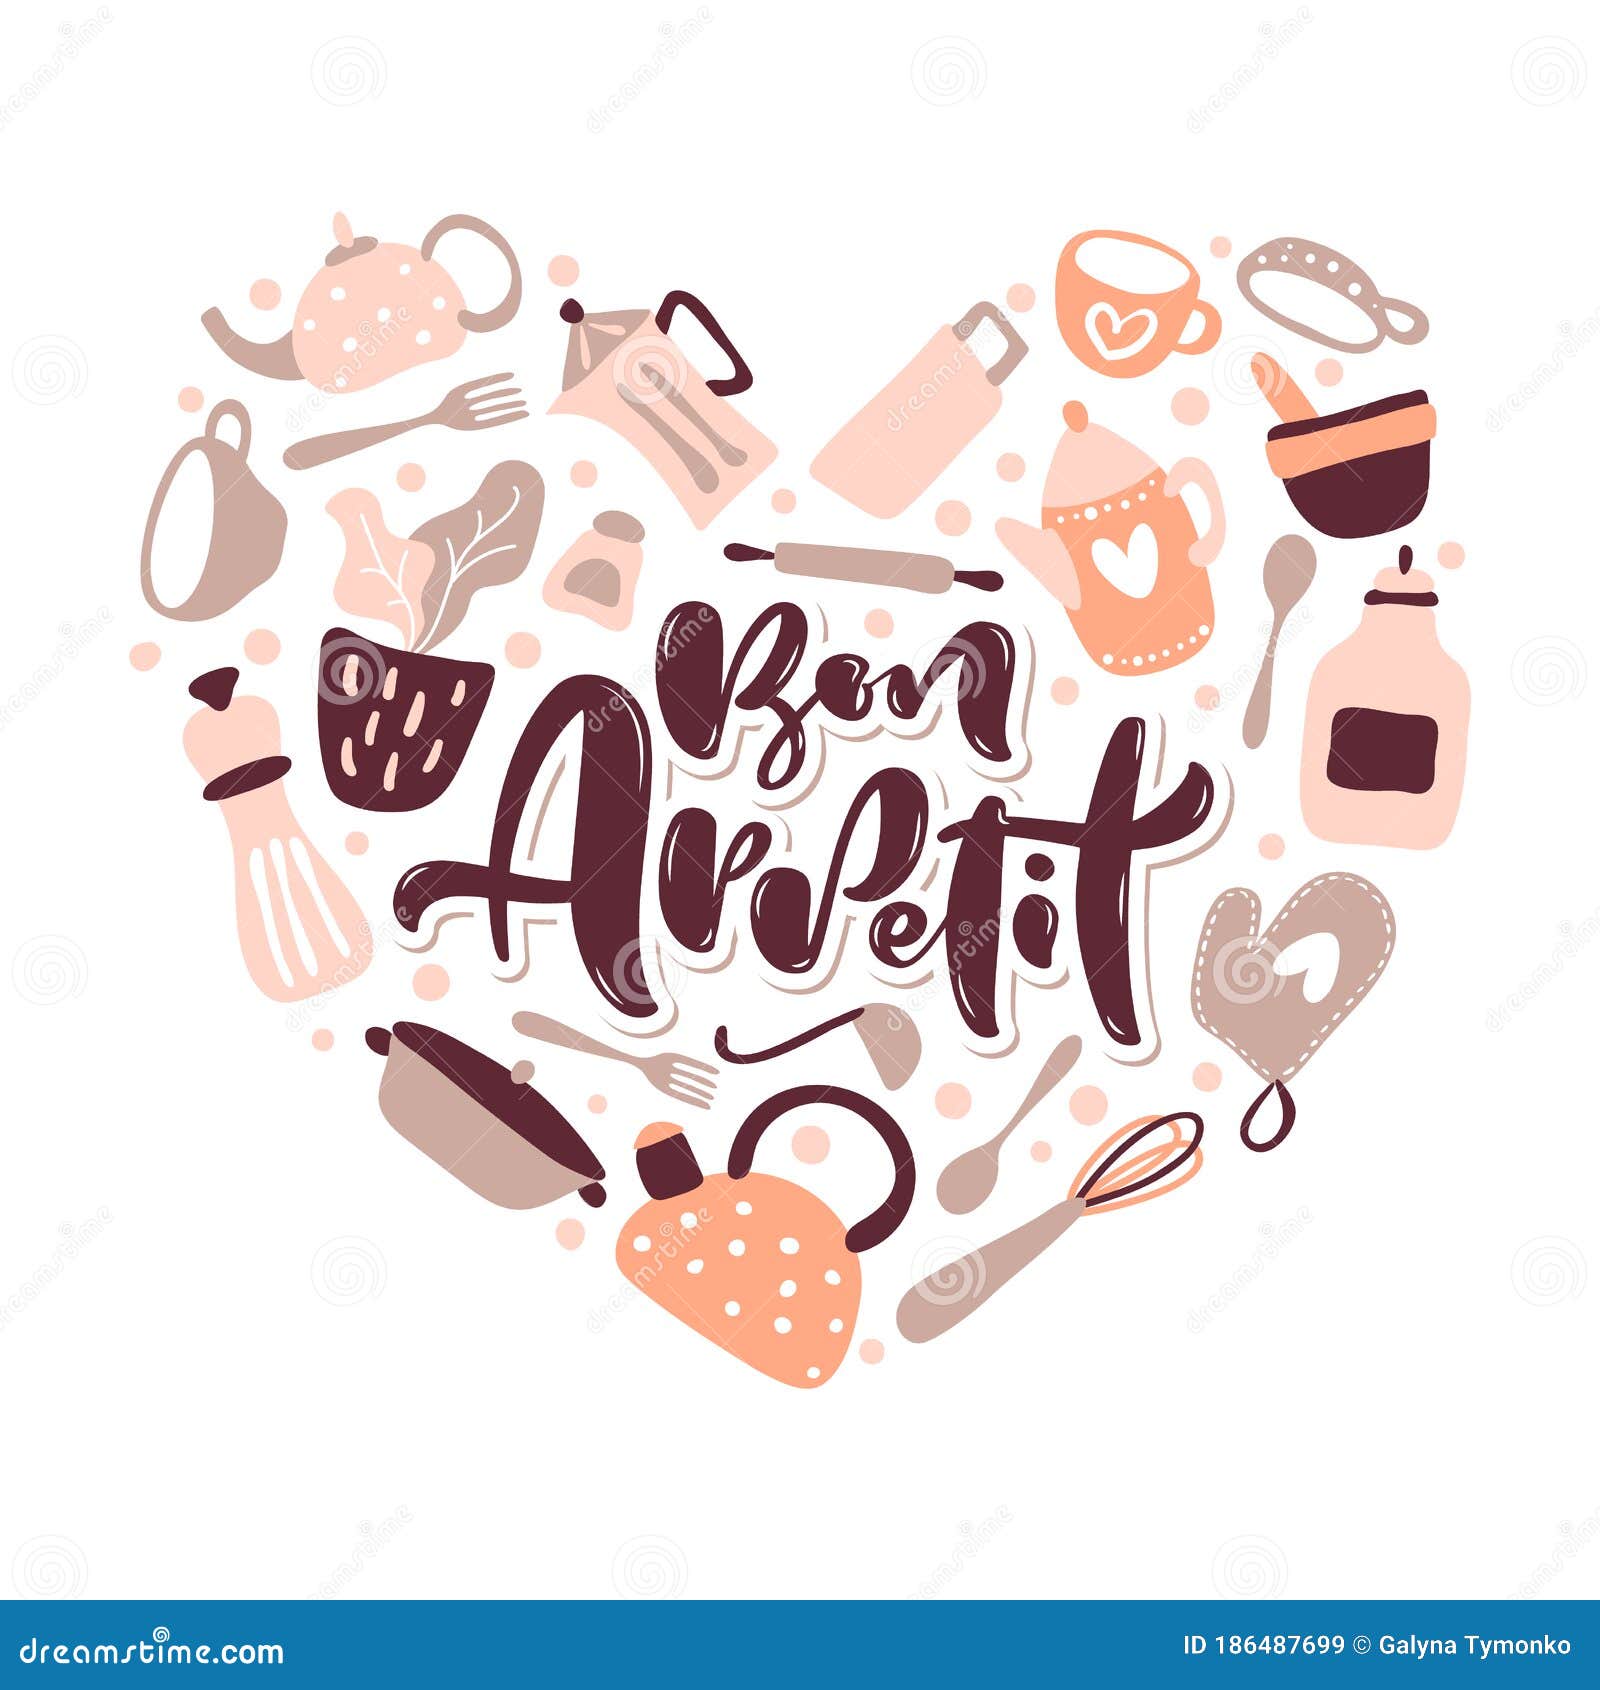 greeting card love with bon appetit lettering  text for food blog kitchen in the  of a heart. cute quote